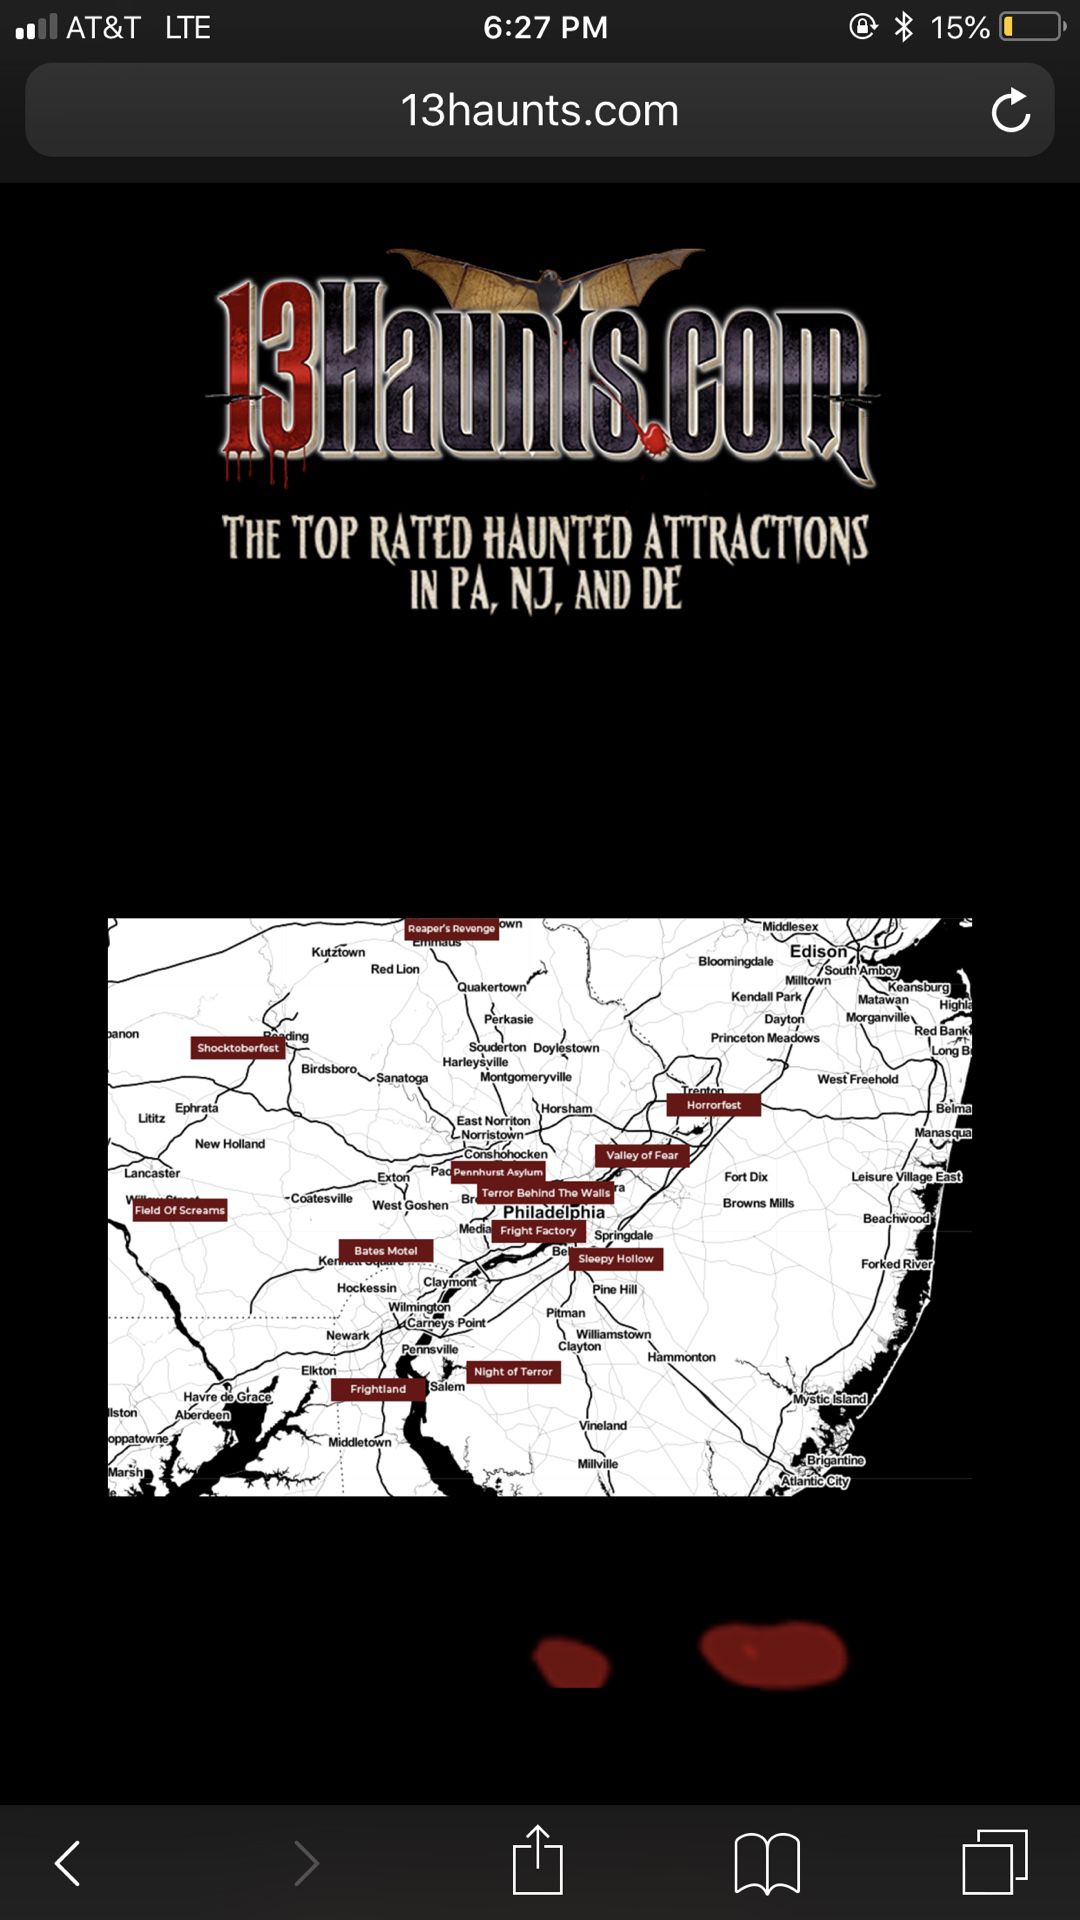 13 haunts complimentary tickets